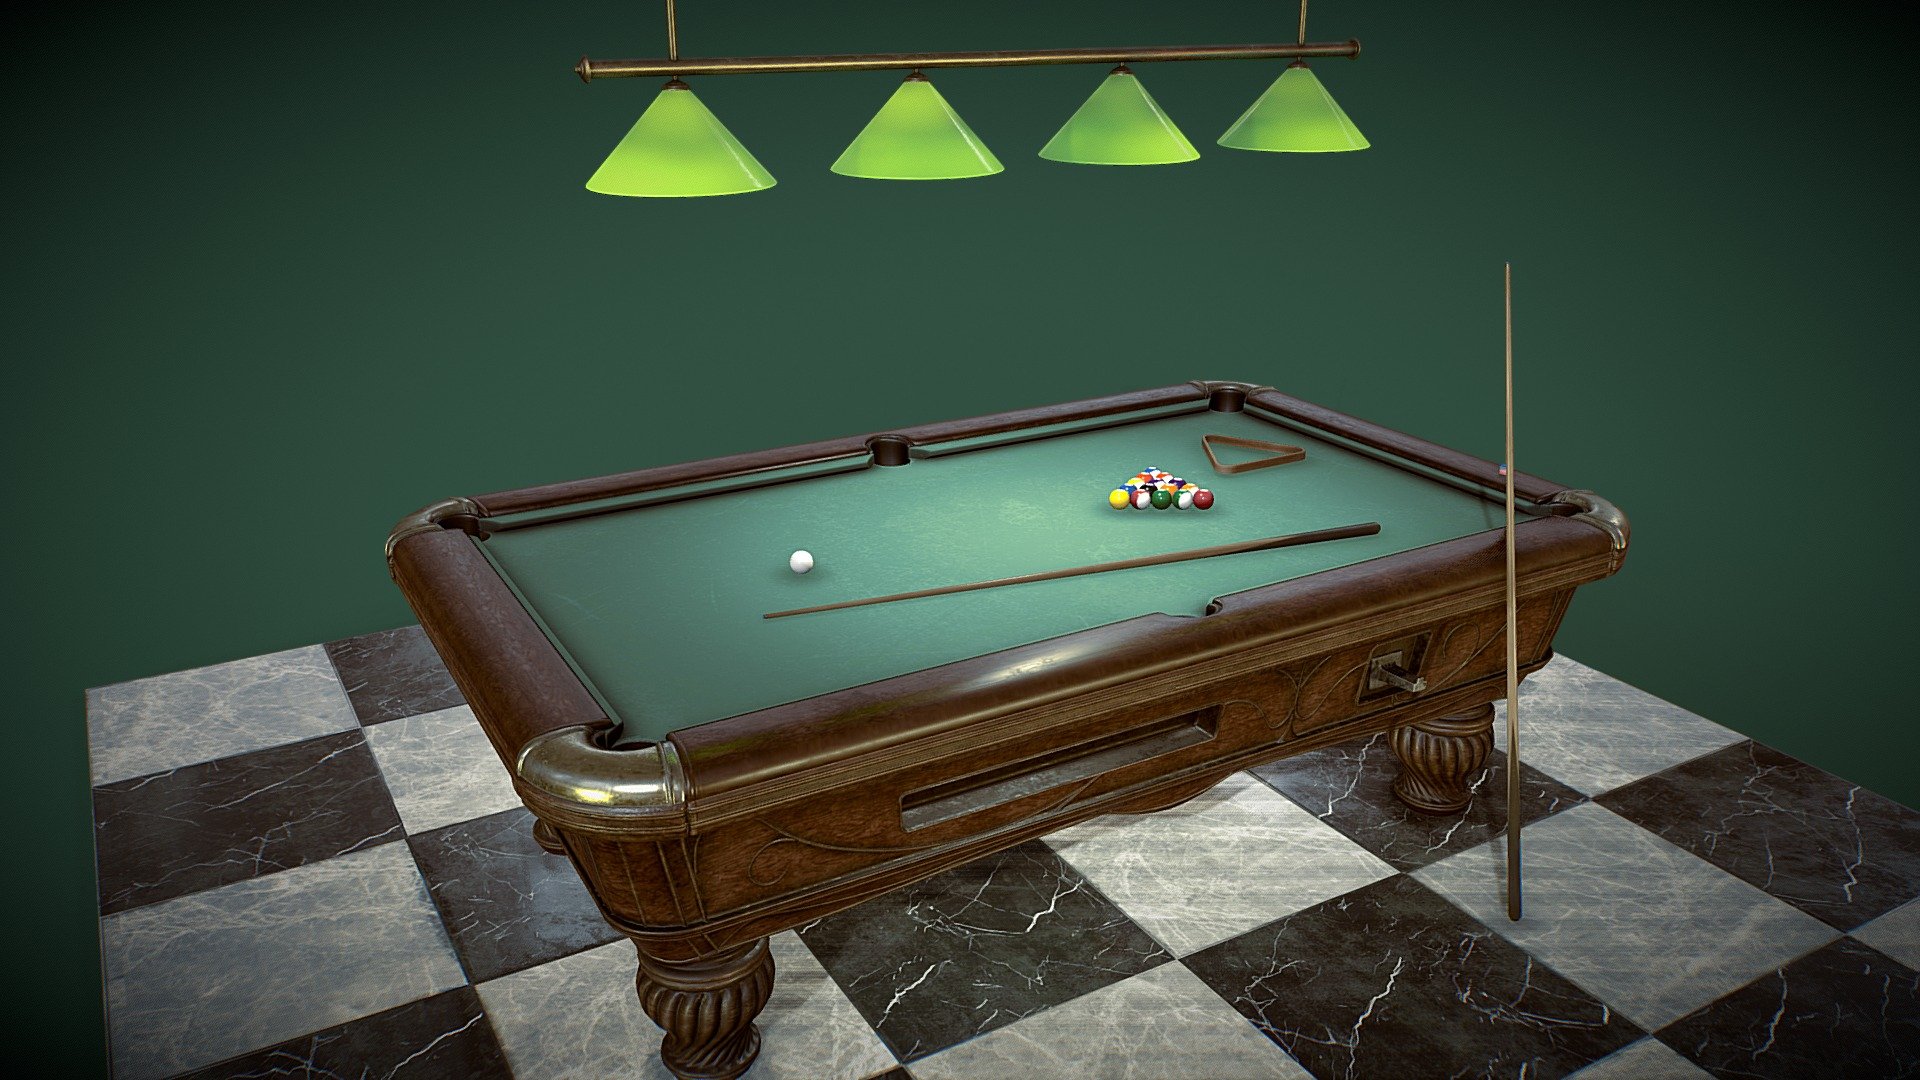 This pool table is forgotten in the hotel halls in Cairo but once a couple of foreign curious characters were playing while they were guessing where the pharaoh was hidden. Wood pool table with 5 assets: pool table, chalk, cues, balls, lamp and floor. The assets are made in low poly high detail version with 24.312 polys, and textures in 4096 x 4096 px. ( Ambient occlusion, metallic, roughness, base color, opacity, emission and normal map) 3d model